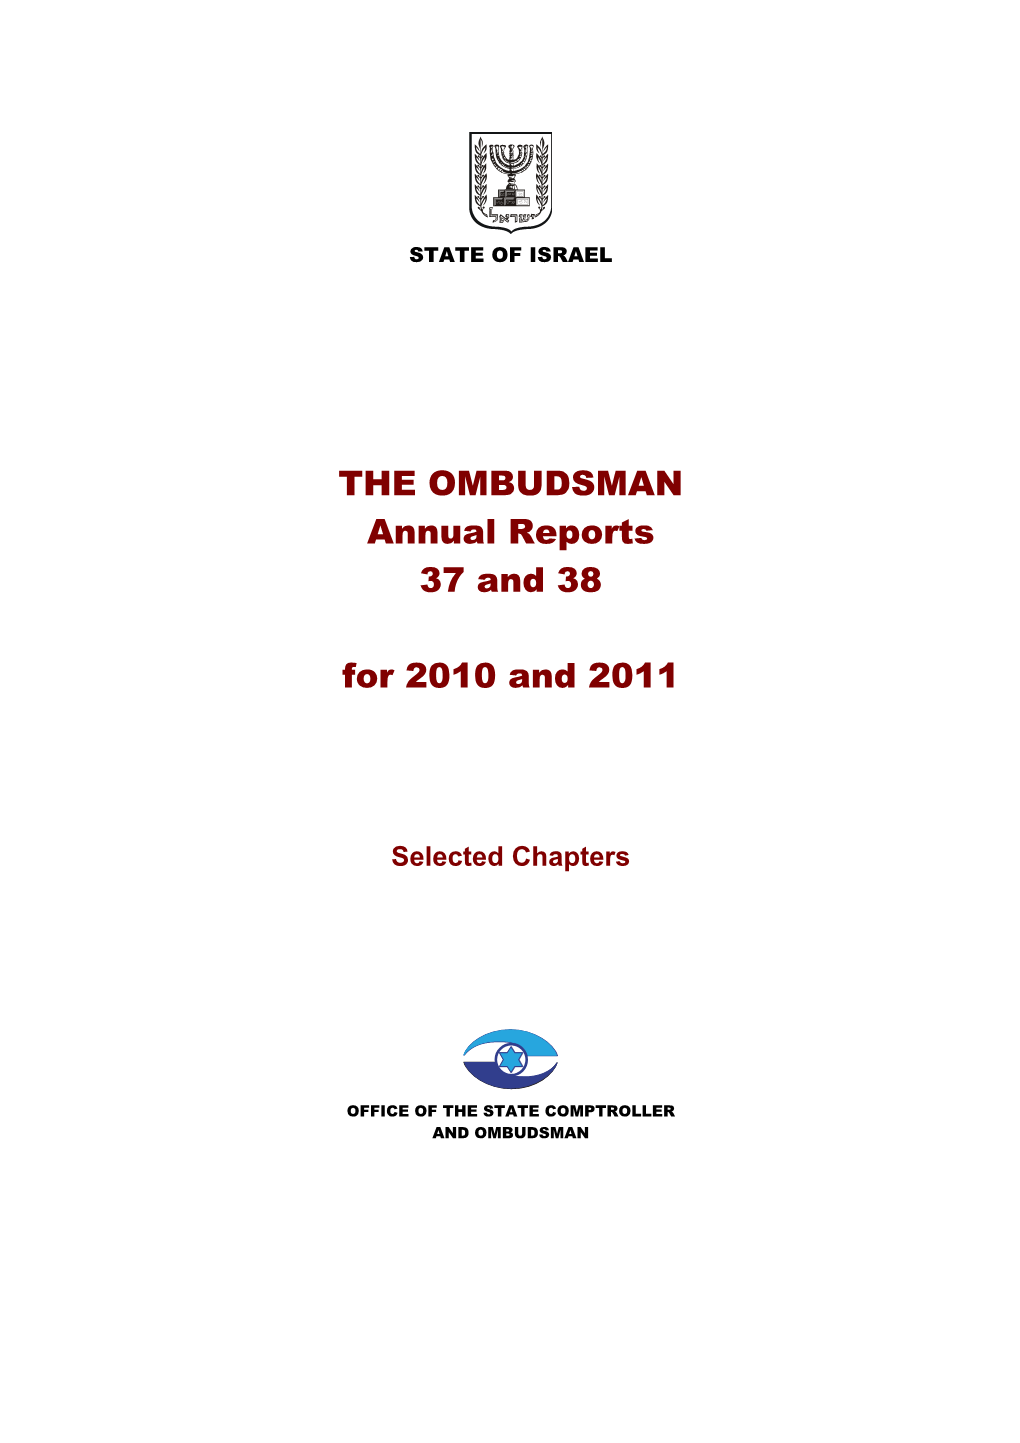 THE OMBUDSMAN Annual Reports 37 and 38 for 2010 and 2011